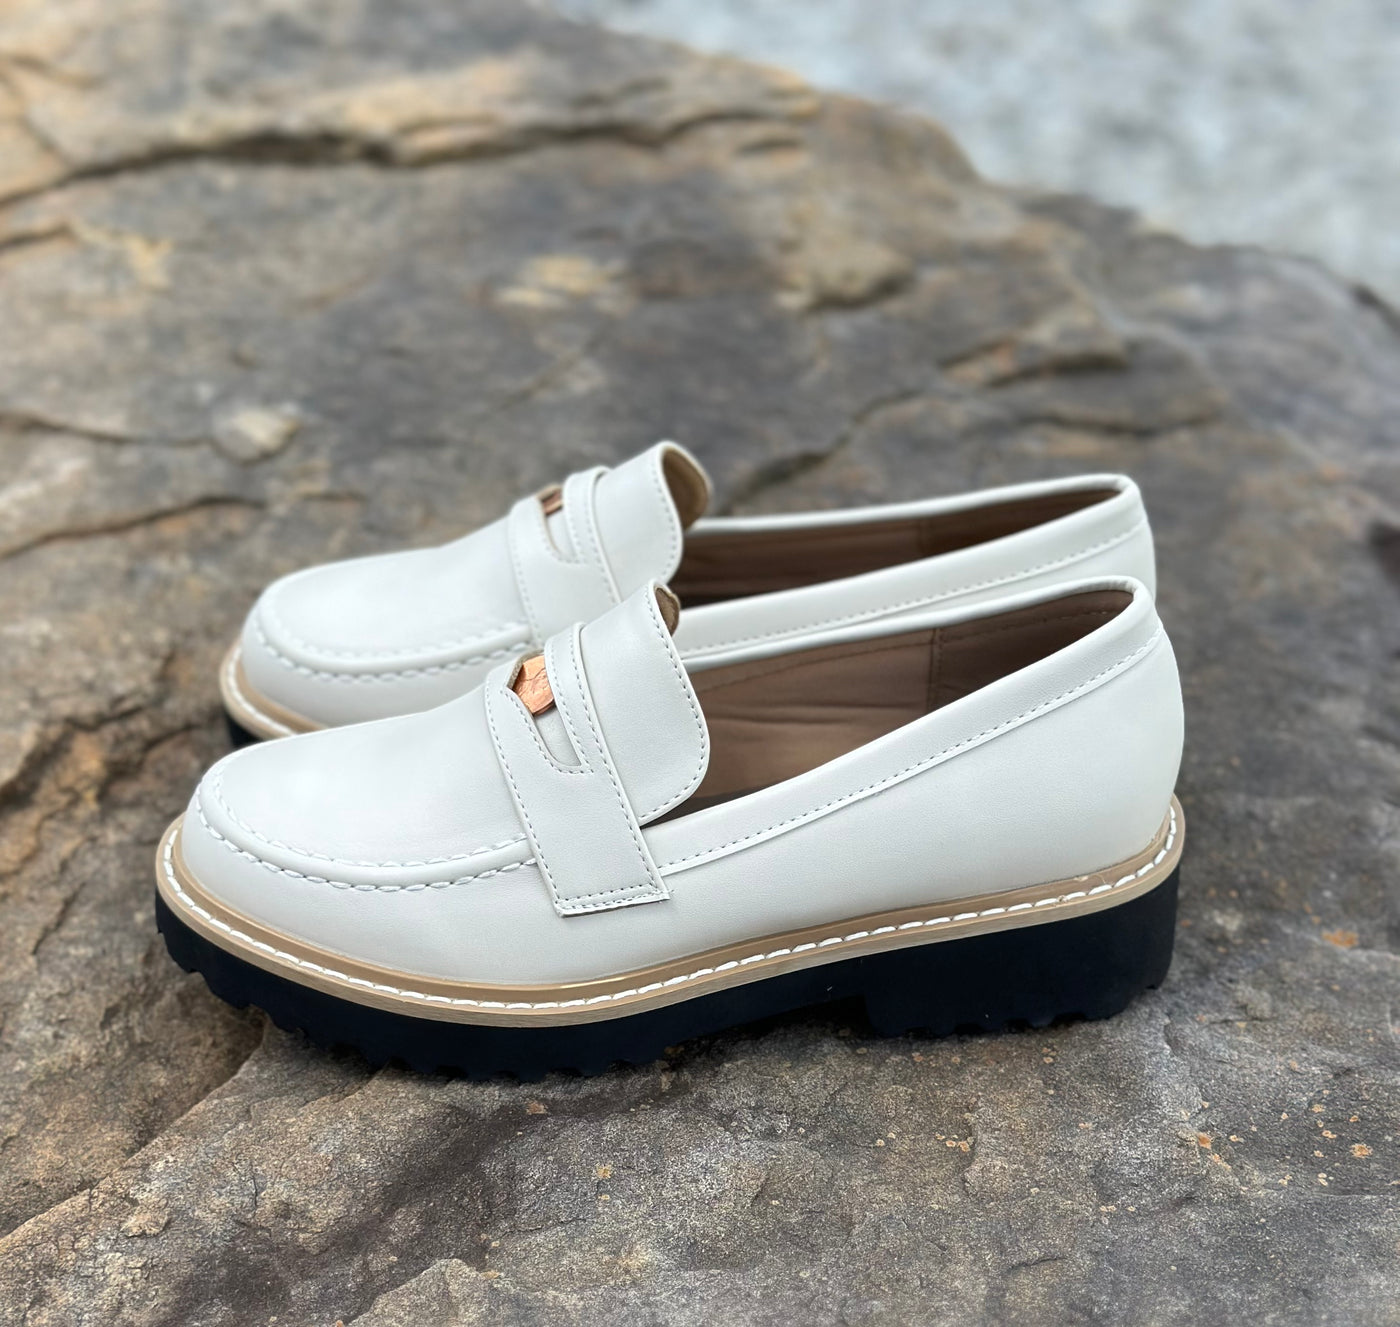 Corkys "Boost" Loafer in Ivory